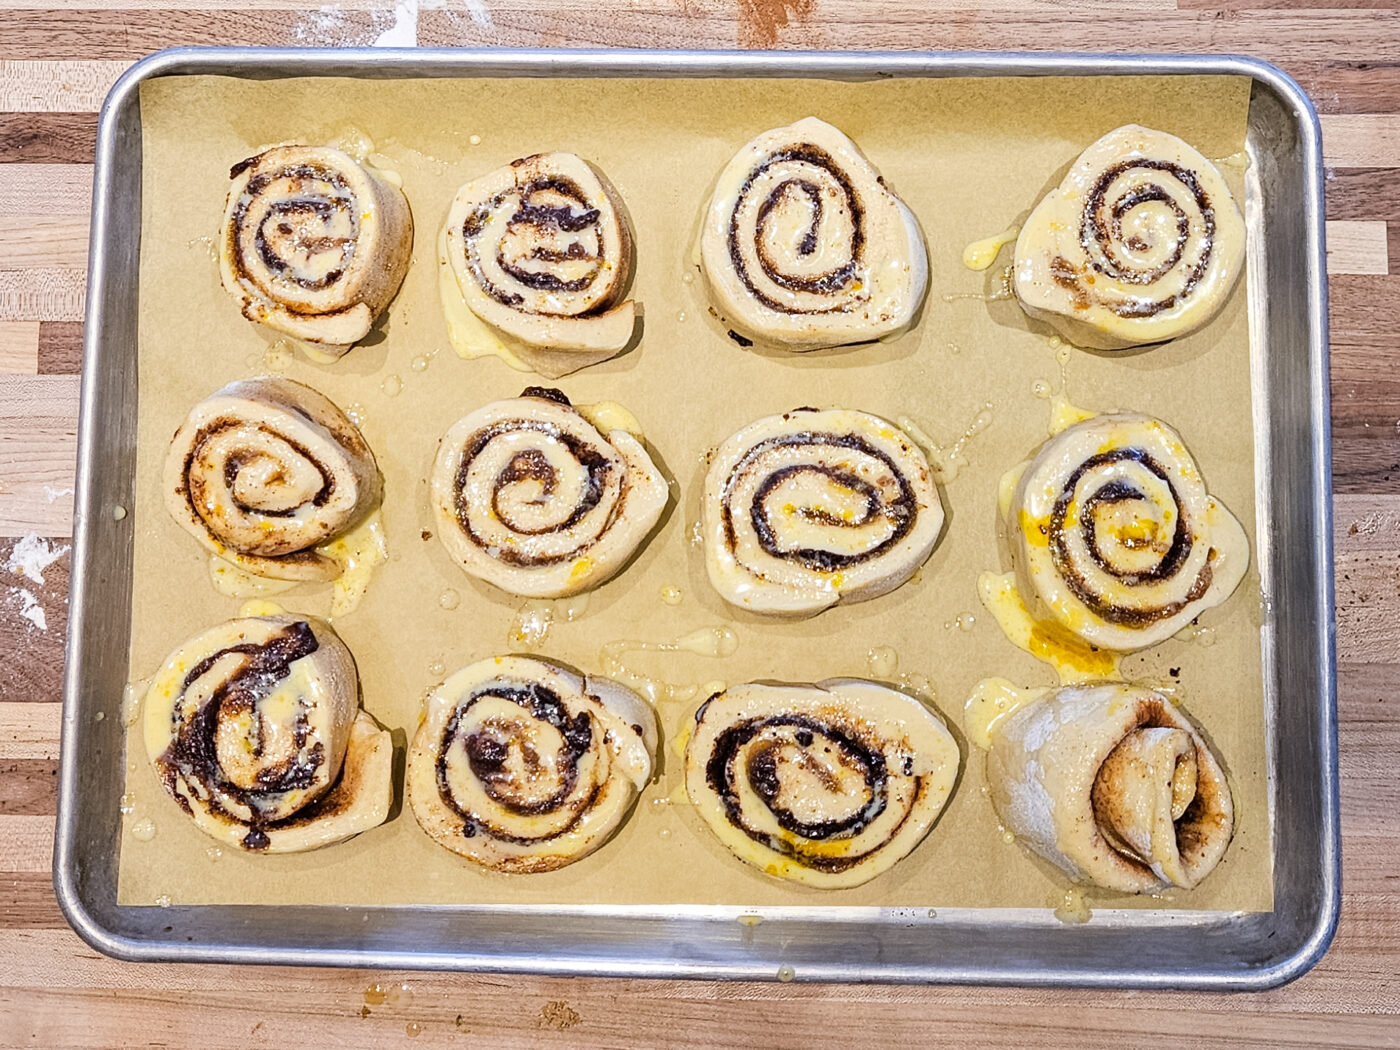 Buns before proofing (right after forming).
